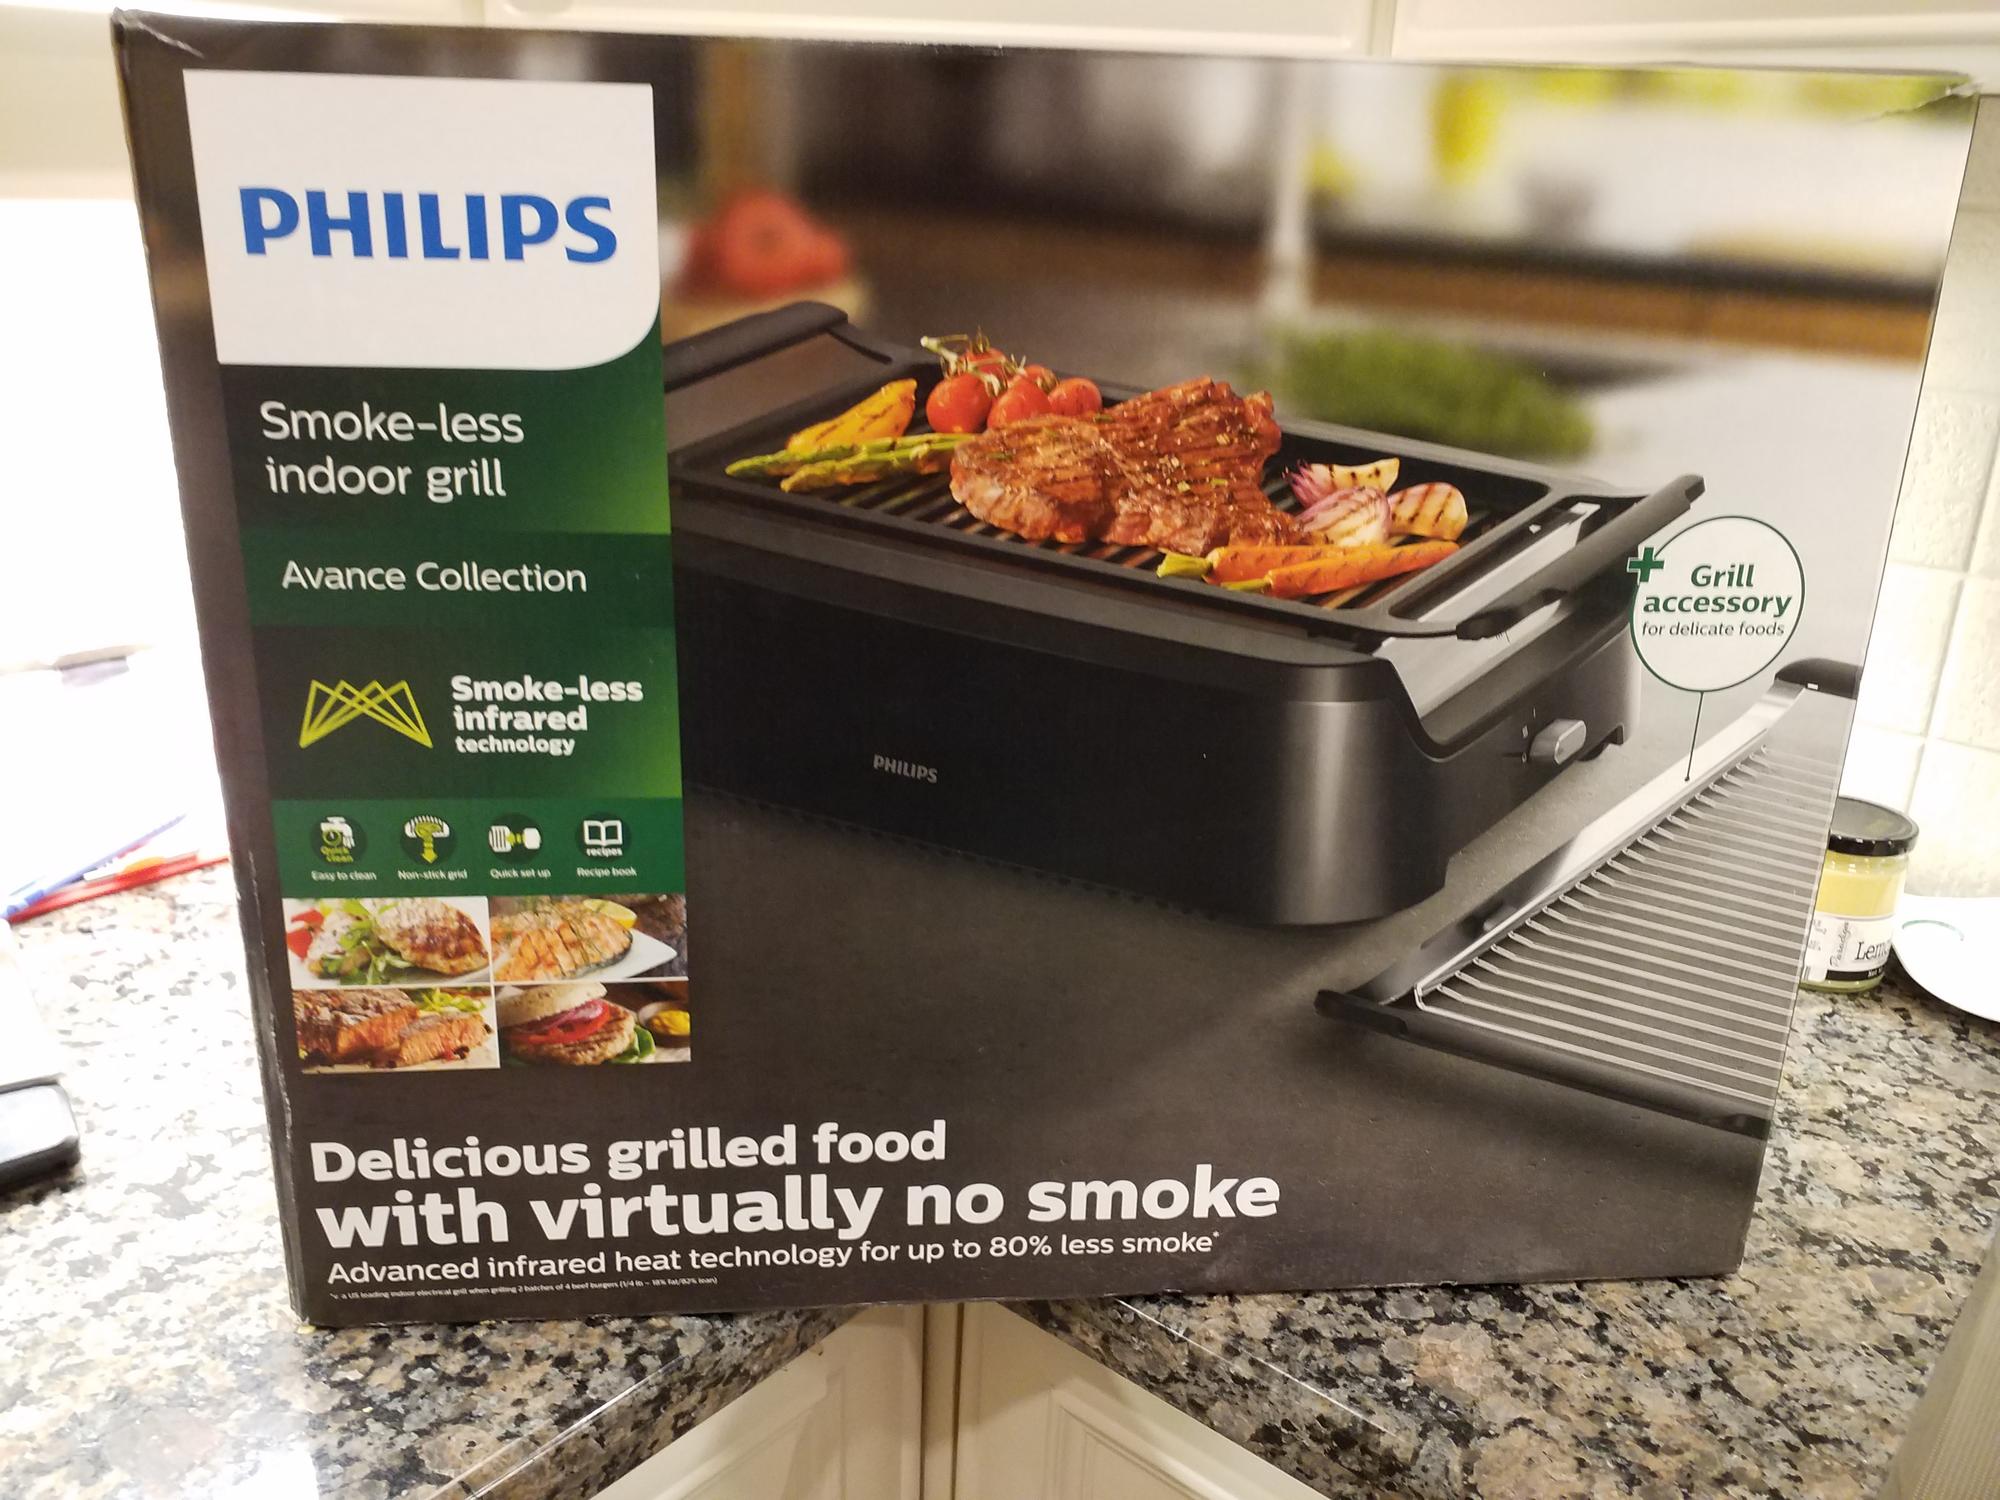 Philips Avance Grill - Kitchen Consumer - eGullet Forums